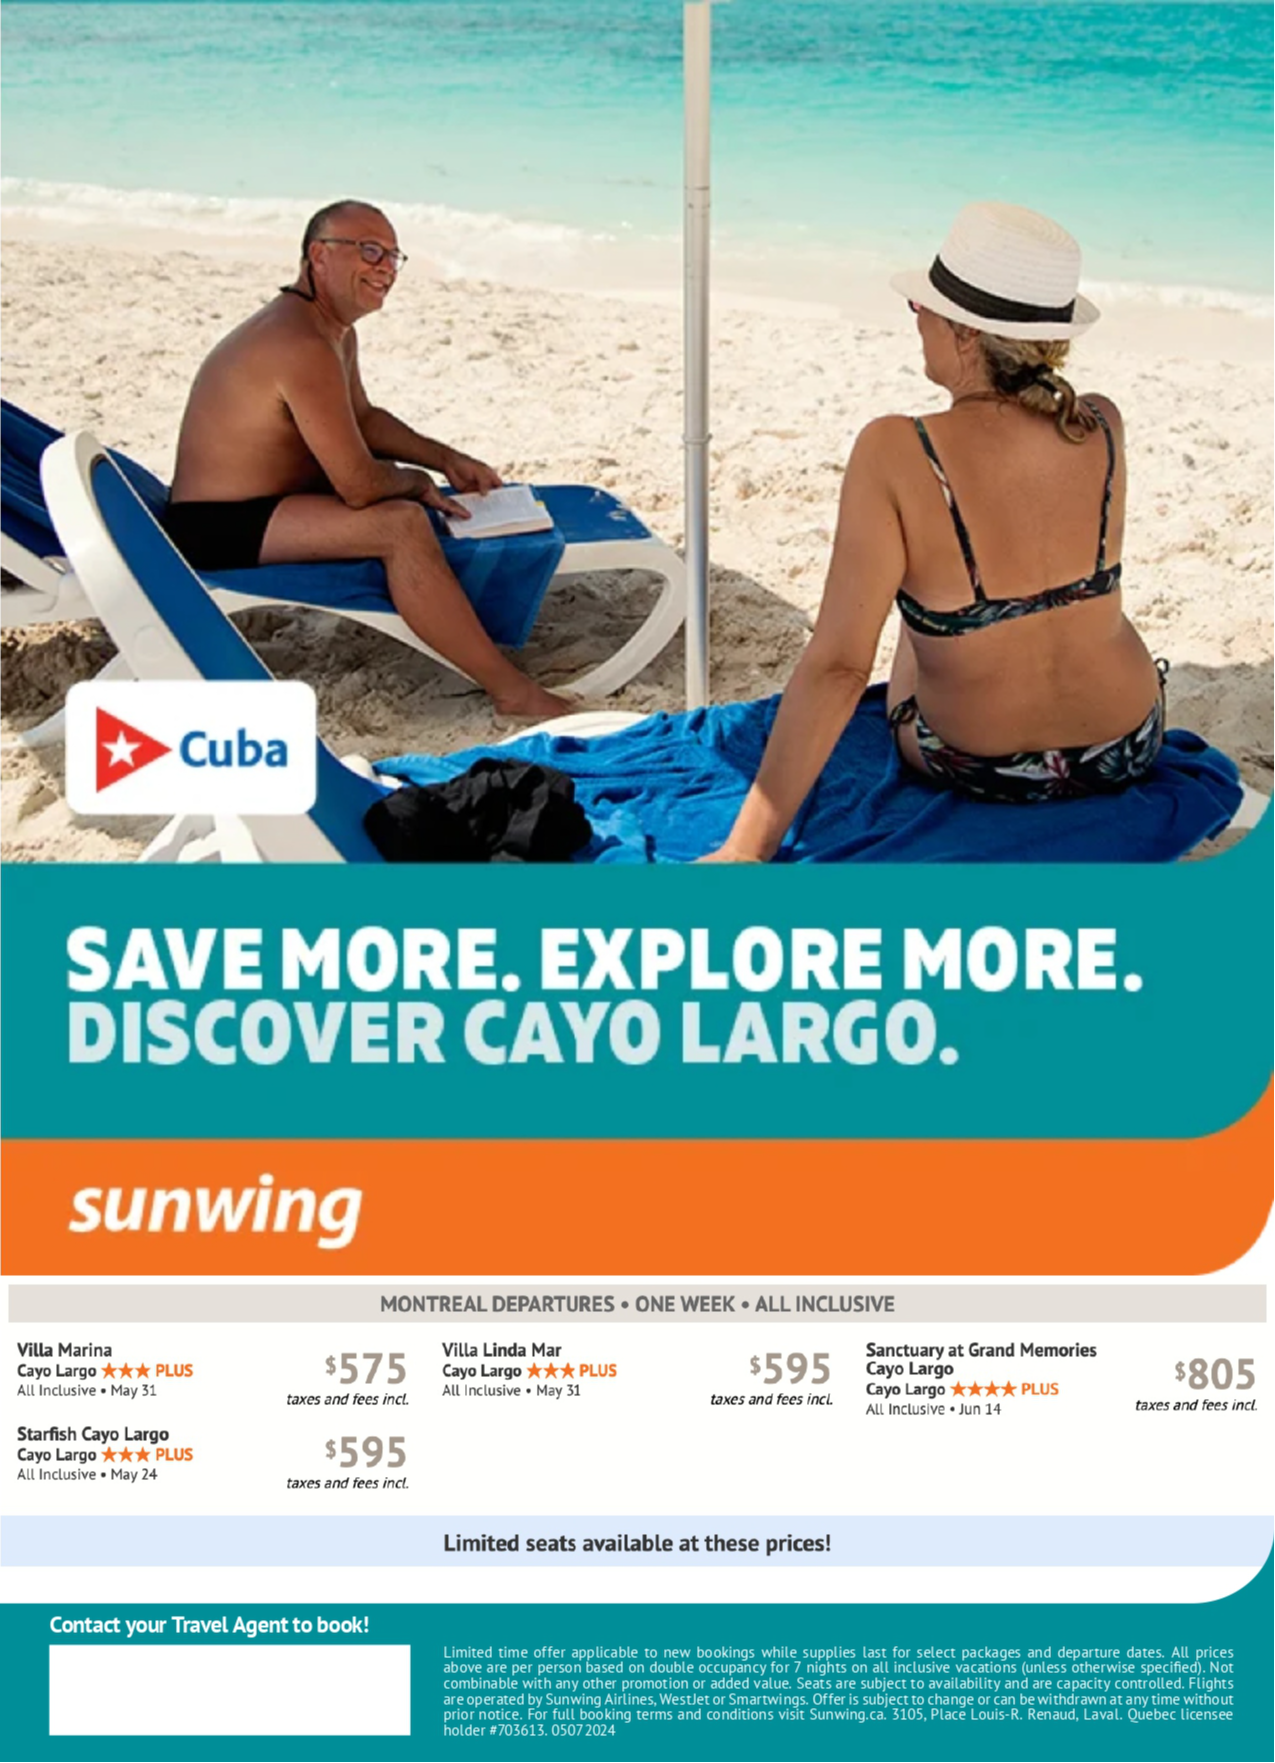 Promotions Sunwing Loves Cuba with Voyages Aqua Terra